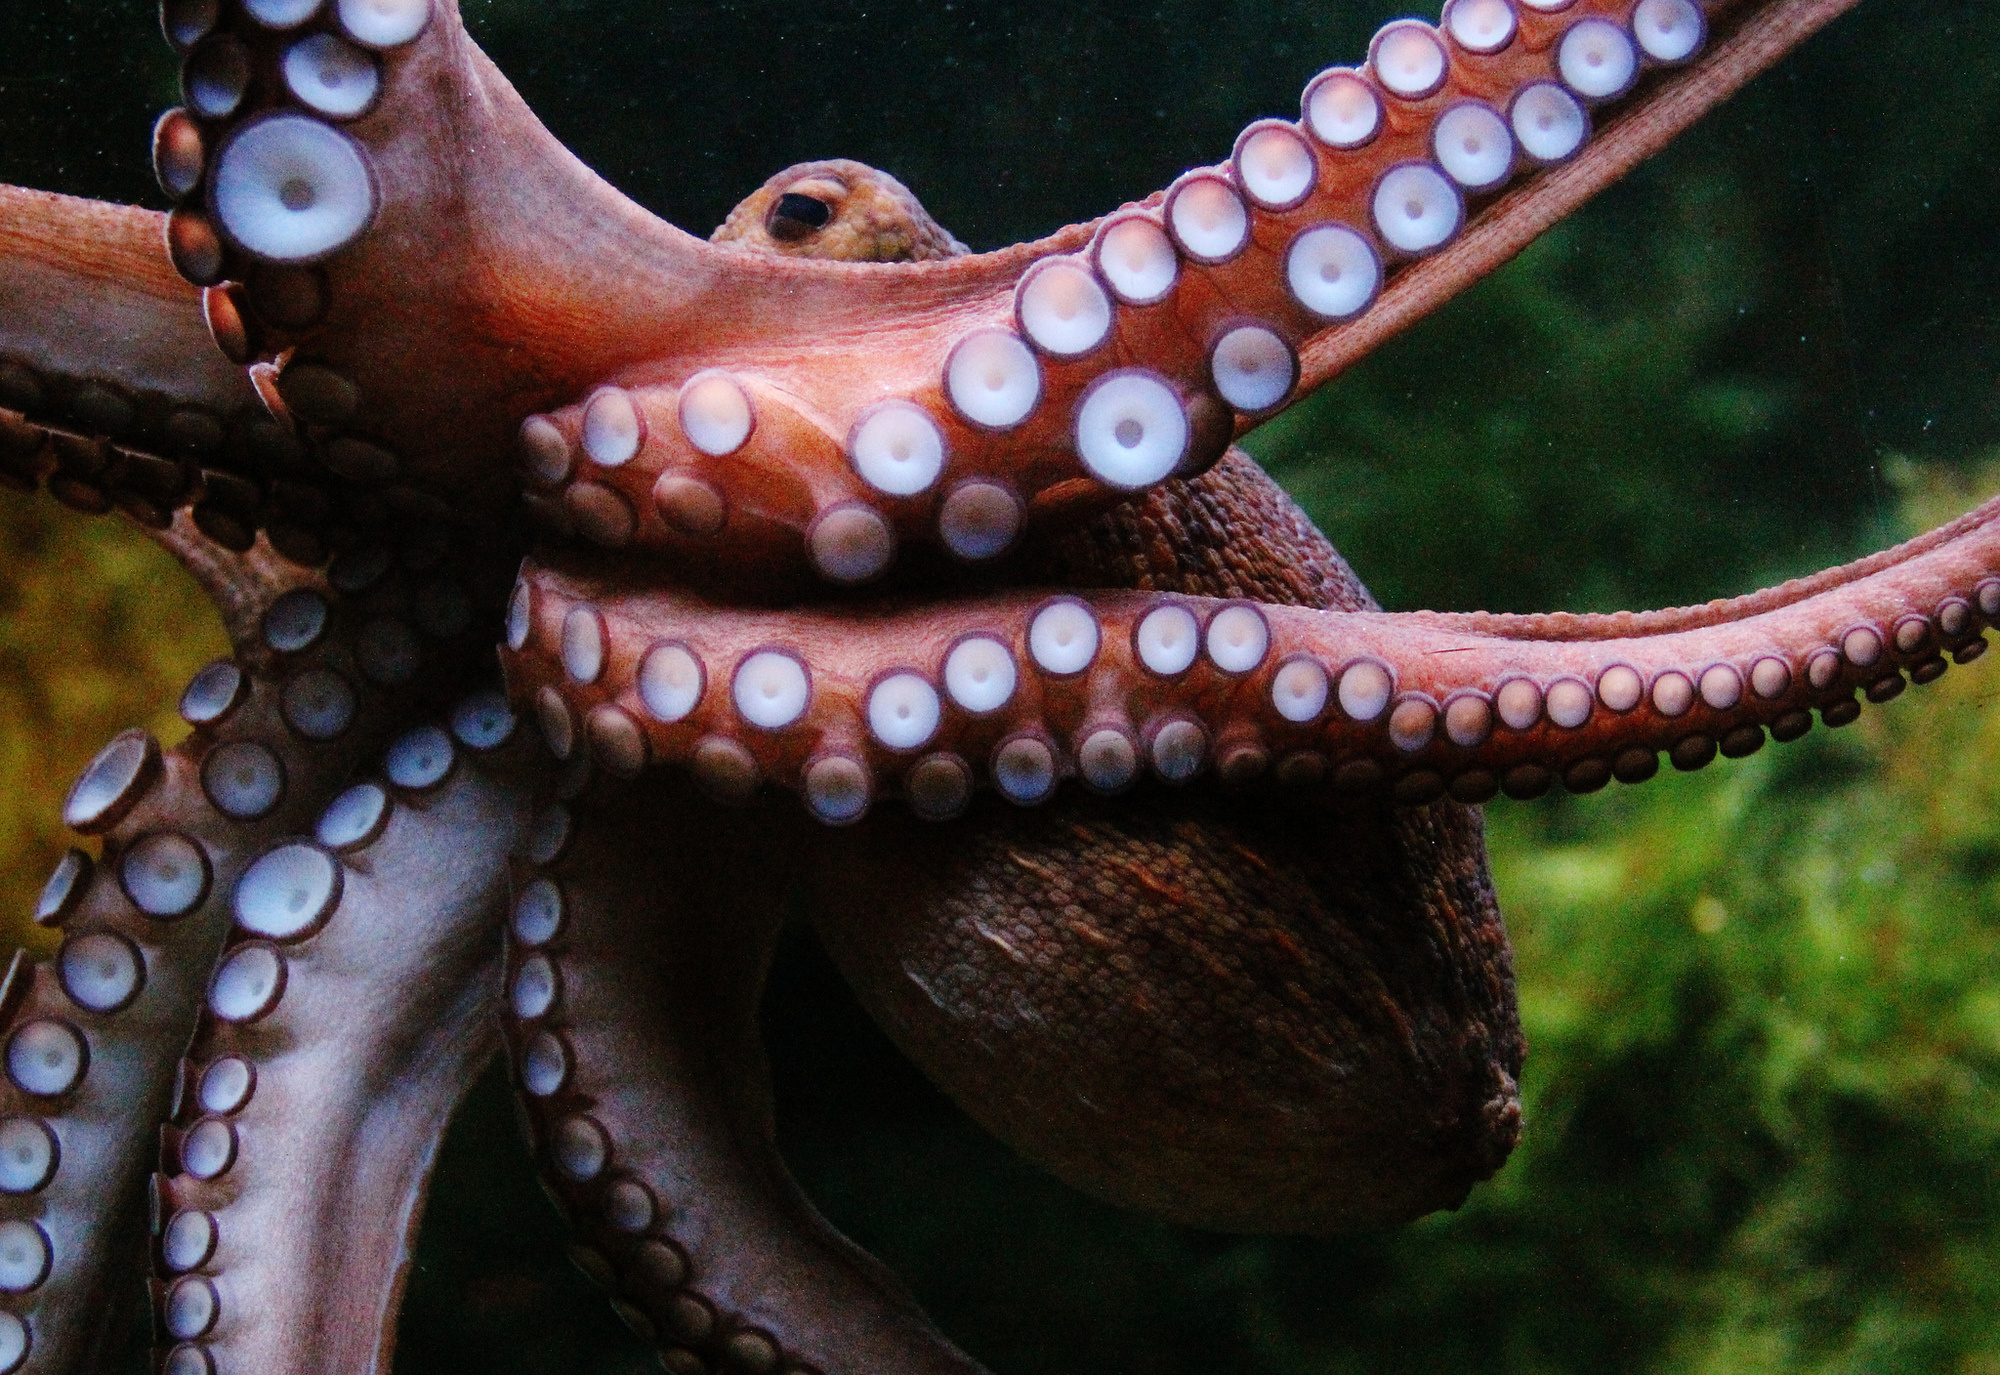 Octopus can be playful, curious, and smart, but they can also change their skin colors several times per hour.
According to studies, they've been known to change color as much as 177 times in 60 minutes, which is probably why the Greeks loved to create myths around them.